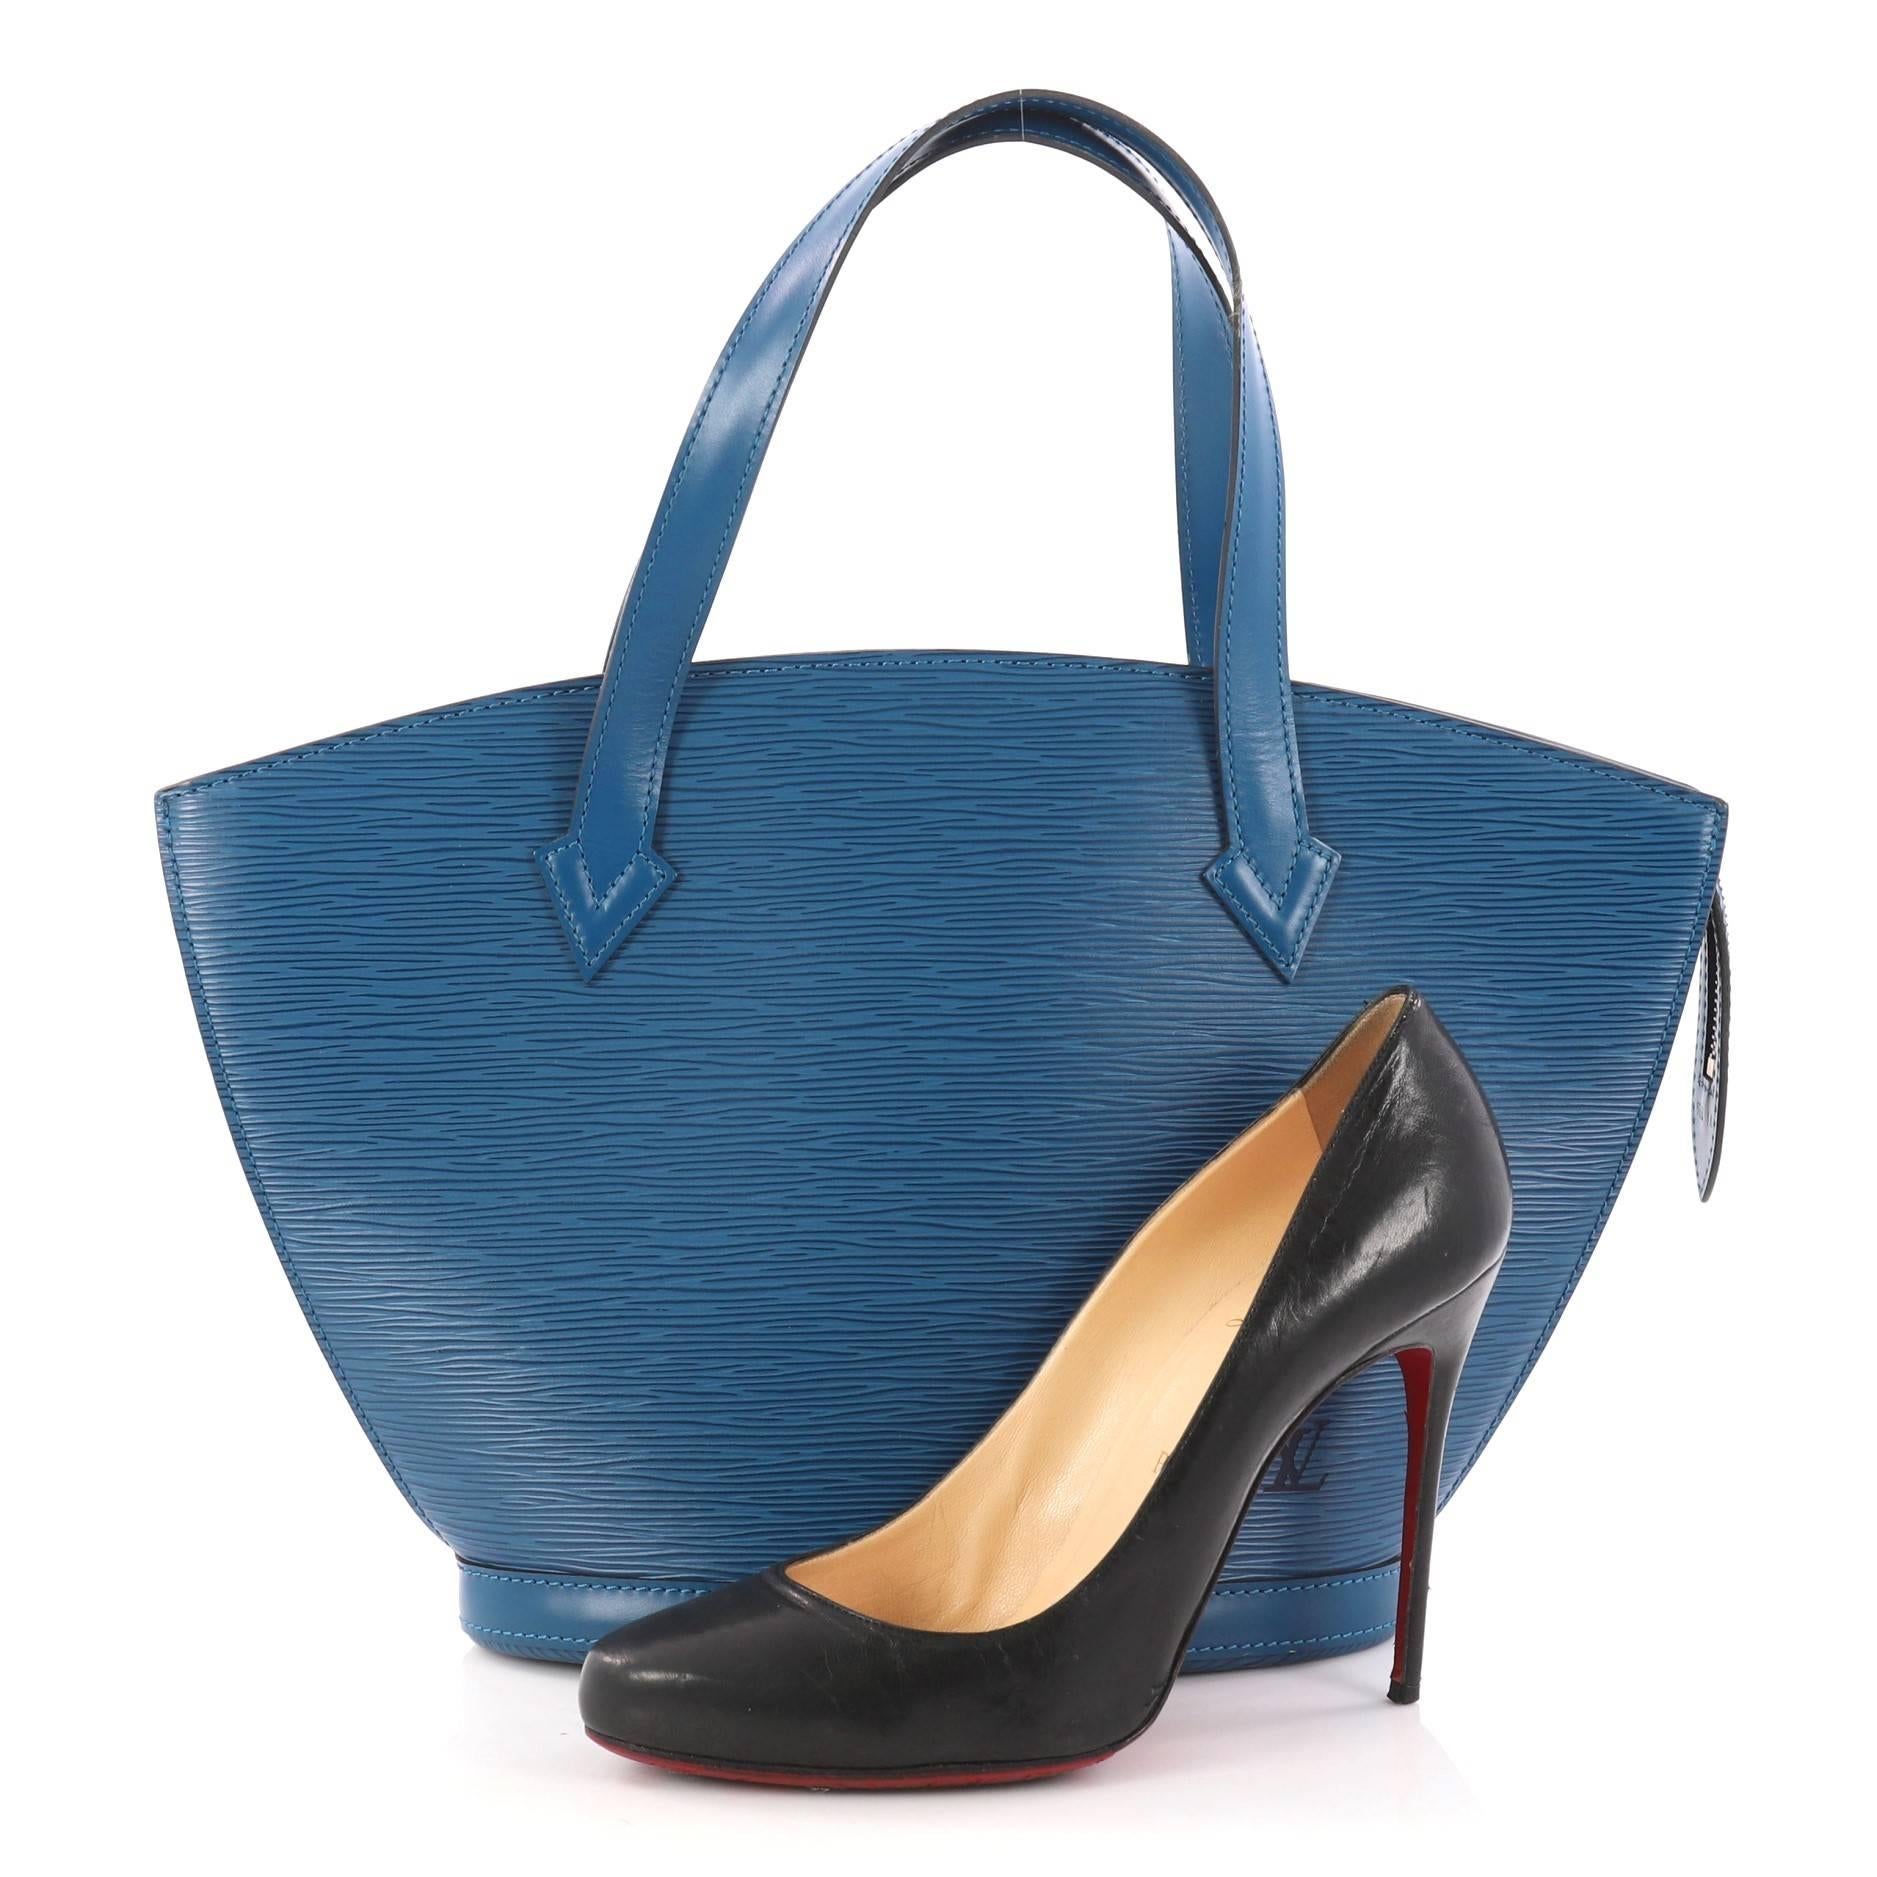 This authentic Louis Vuitton Saint Jacques Handbag Epi Leather PM is refined and elegant. Crafted from Louis Vuitton's signature blue epi leather and sturdy base, this fan-shaped bag features dual-flatleather straps, subtle LV logo at the front and